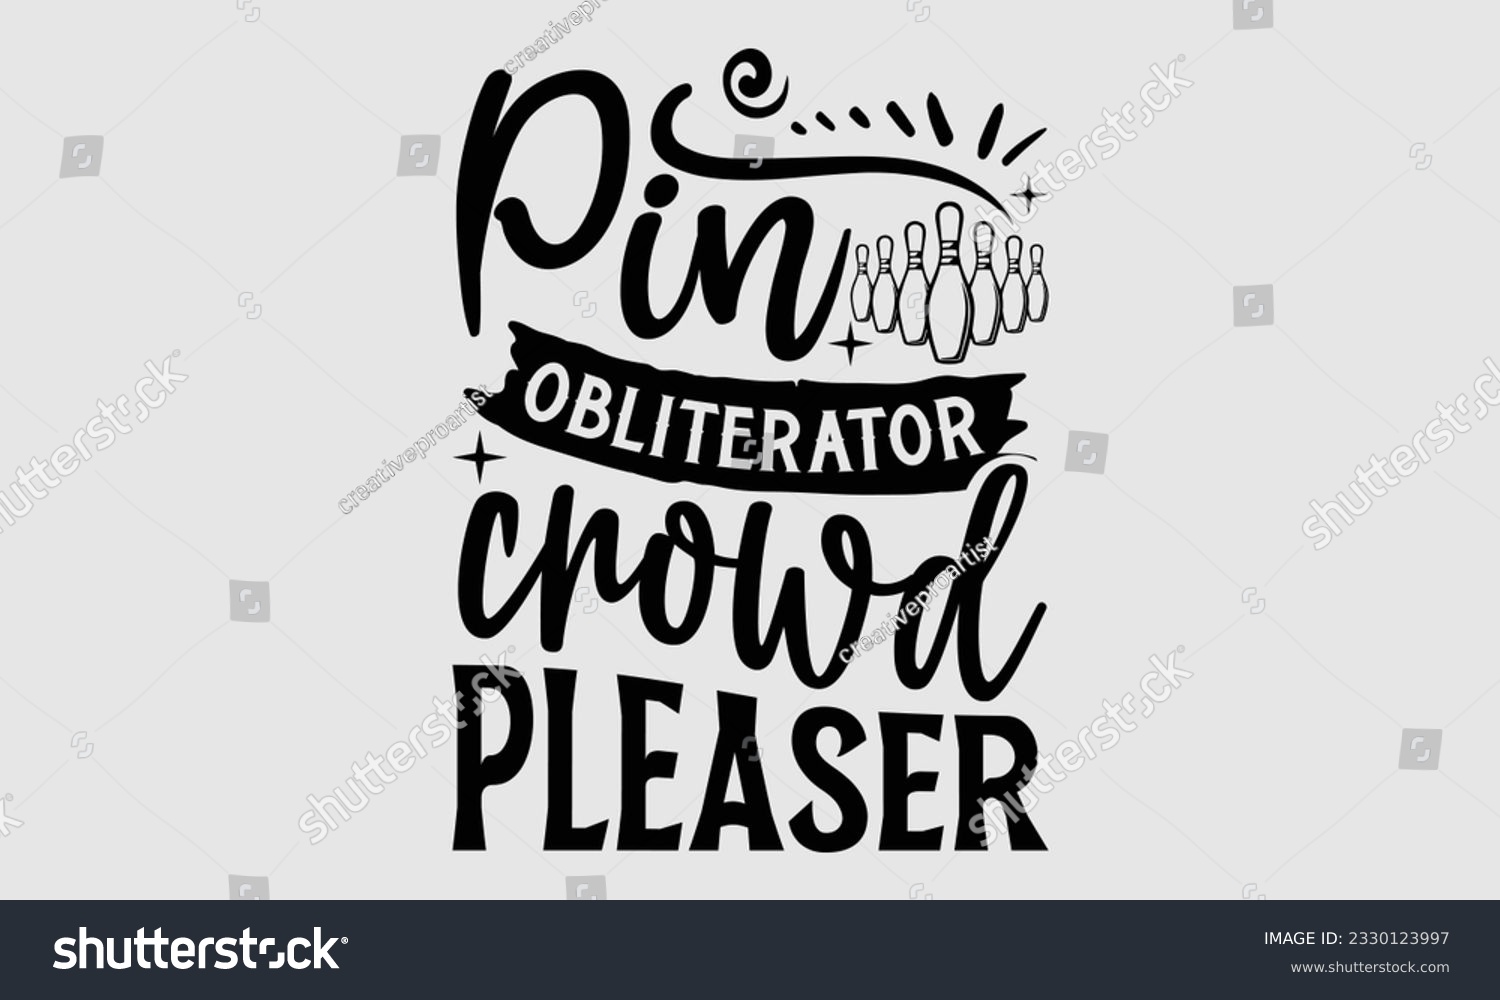 SVG of Pin Obliterator Crowd Pleaser- Bowling t-shirt design, Illustration for prints on SVG and bags, posters, cards, greeting card template with typography text EPS svg